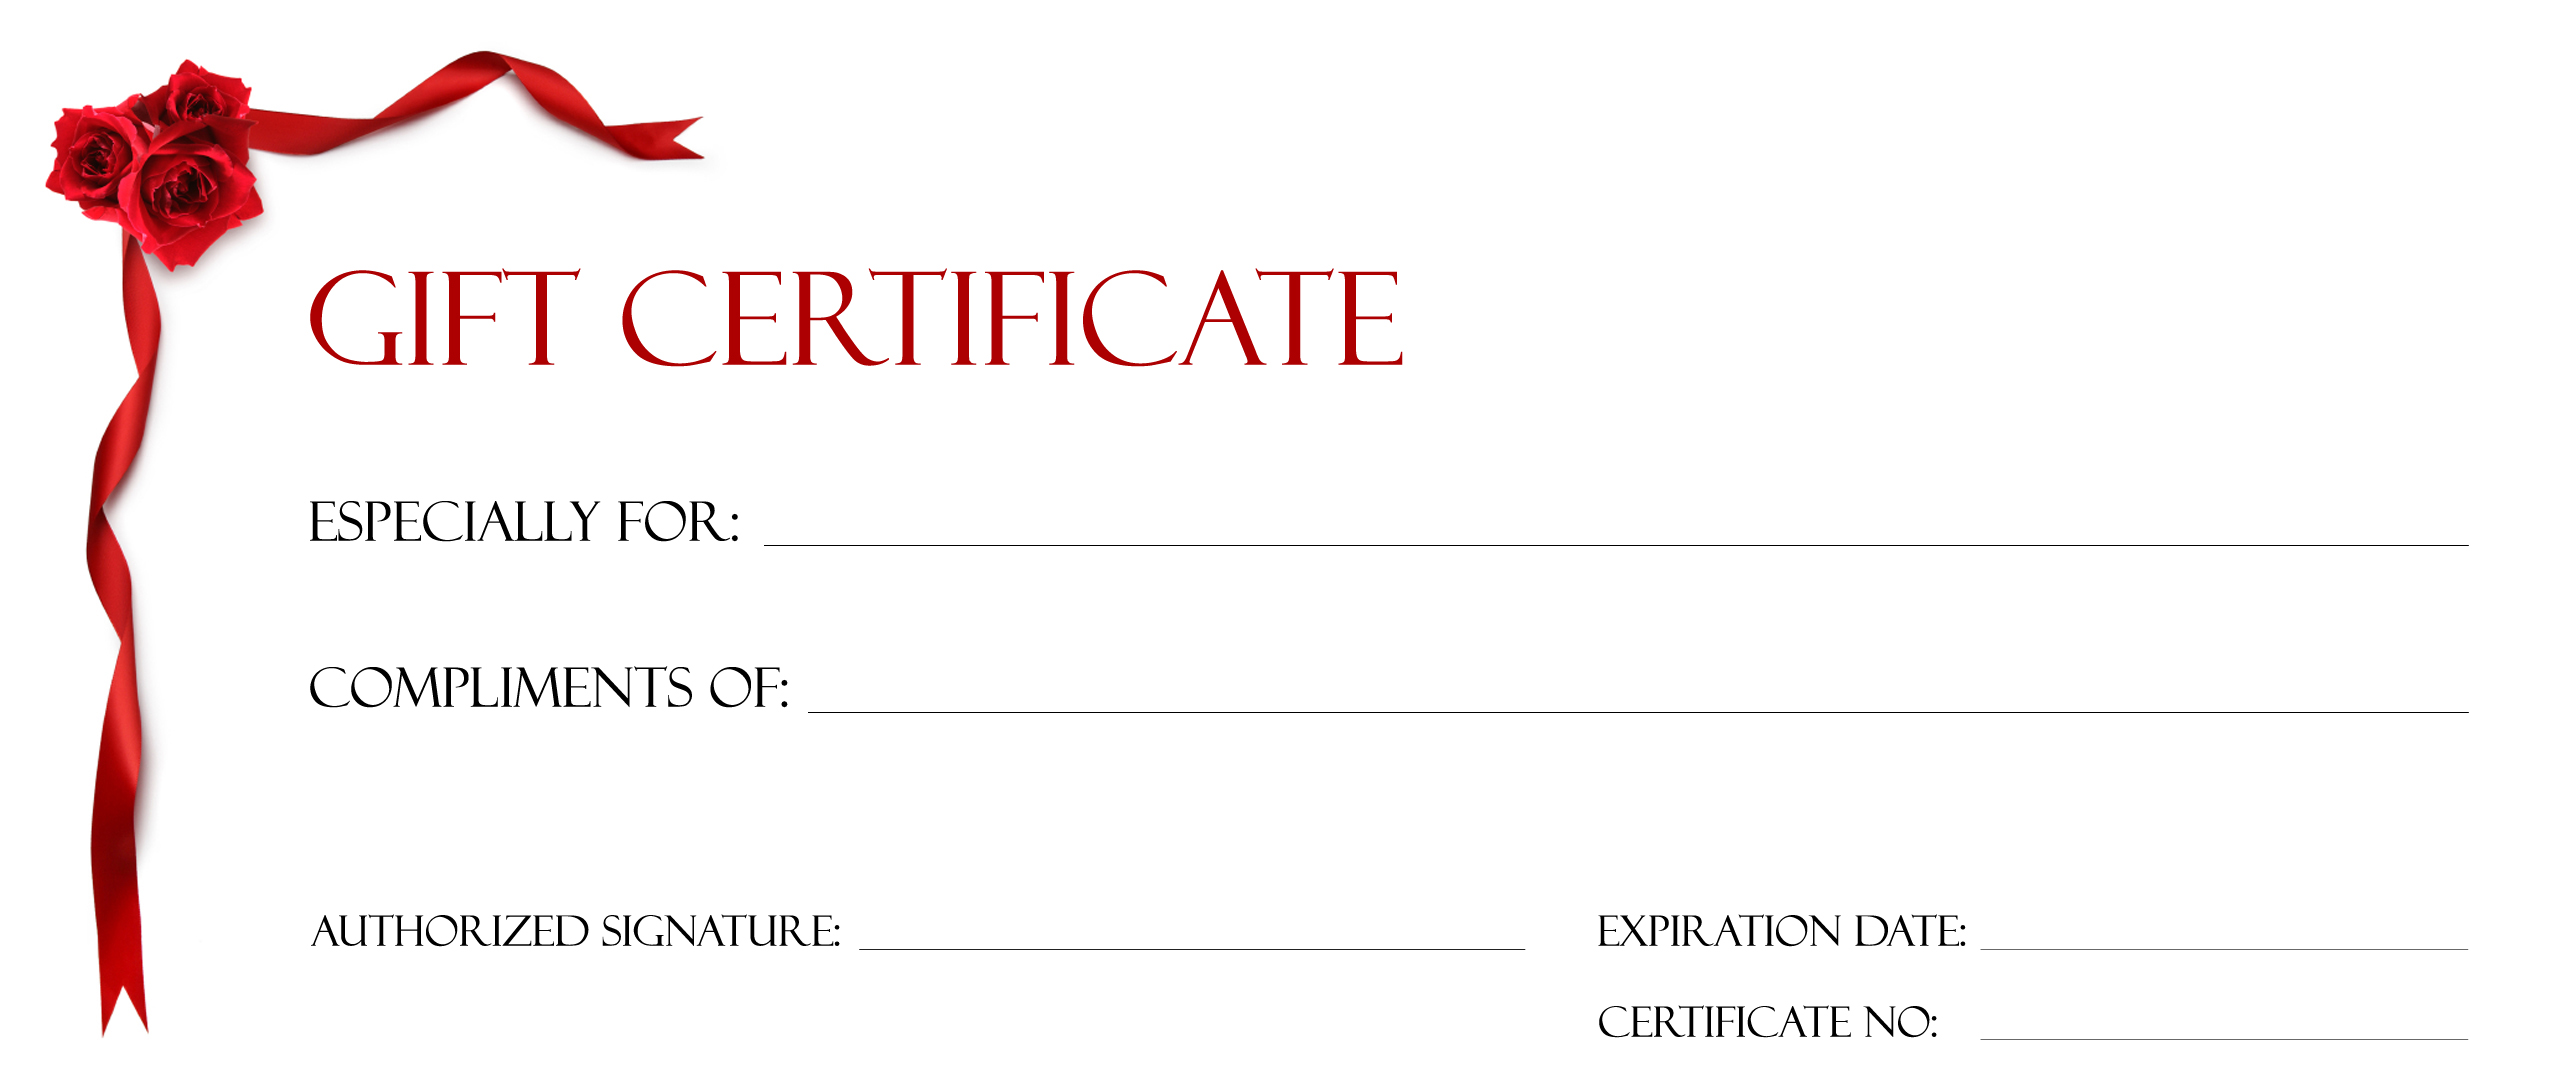 Awesome Gif Image: Make Your Own Gift Voucher Template In Dinner Certificate Template Free